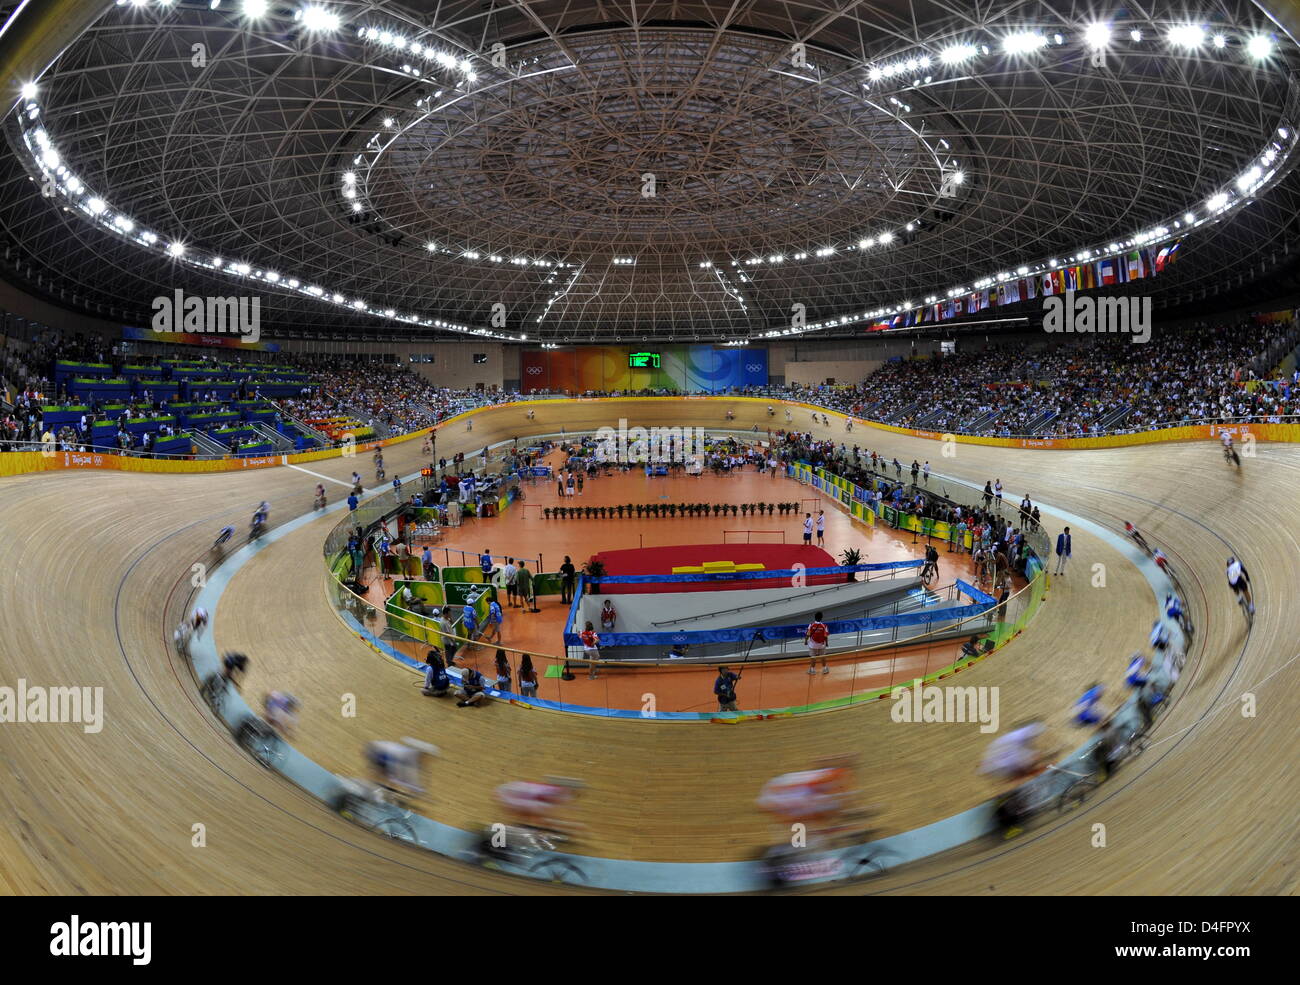 A general view during the Cycling - Track competition at Laoshan Velodrome at the Beijing 2008 Olympic Games, Beijing, China, 19 August 2008. Photo: Peer Grimm dpa ###dpa### Stock Photo